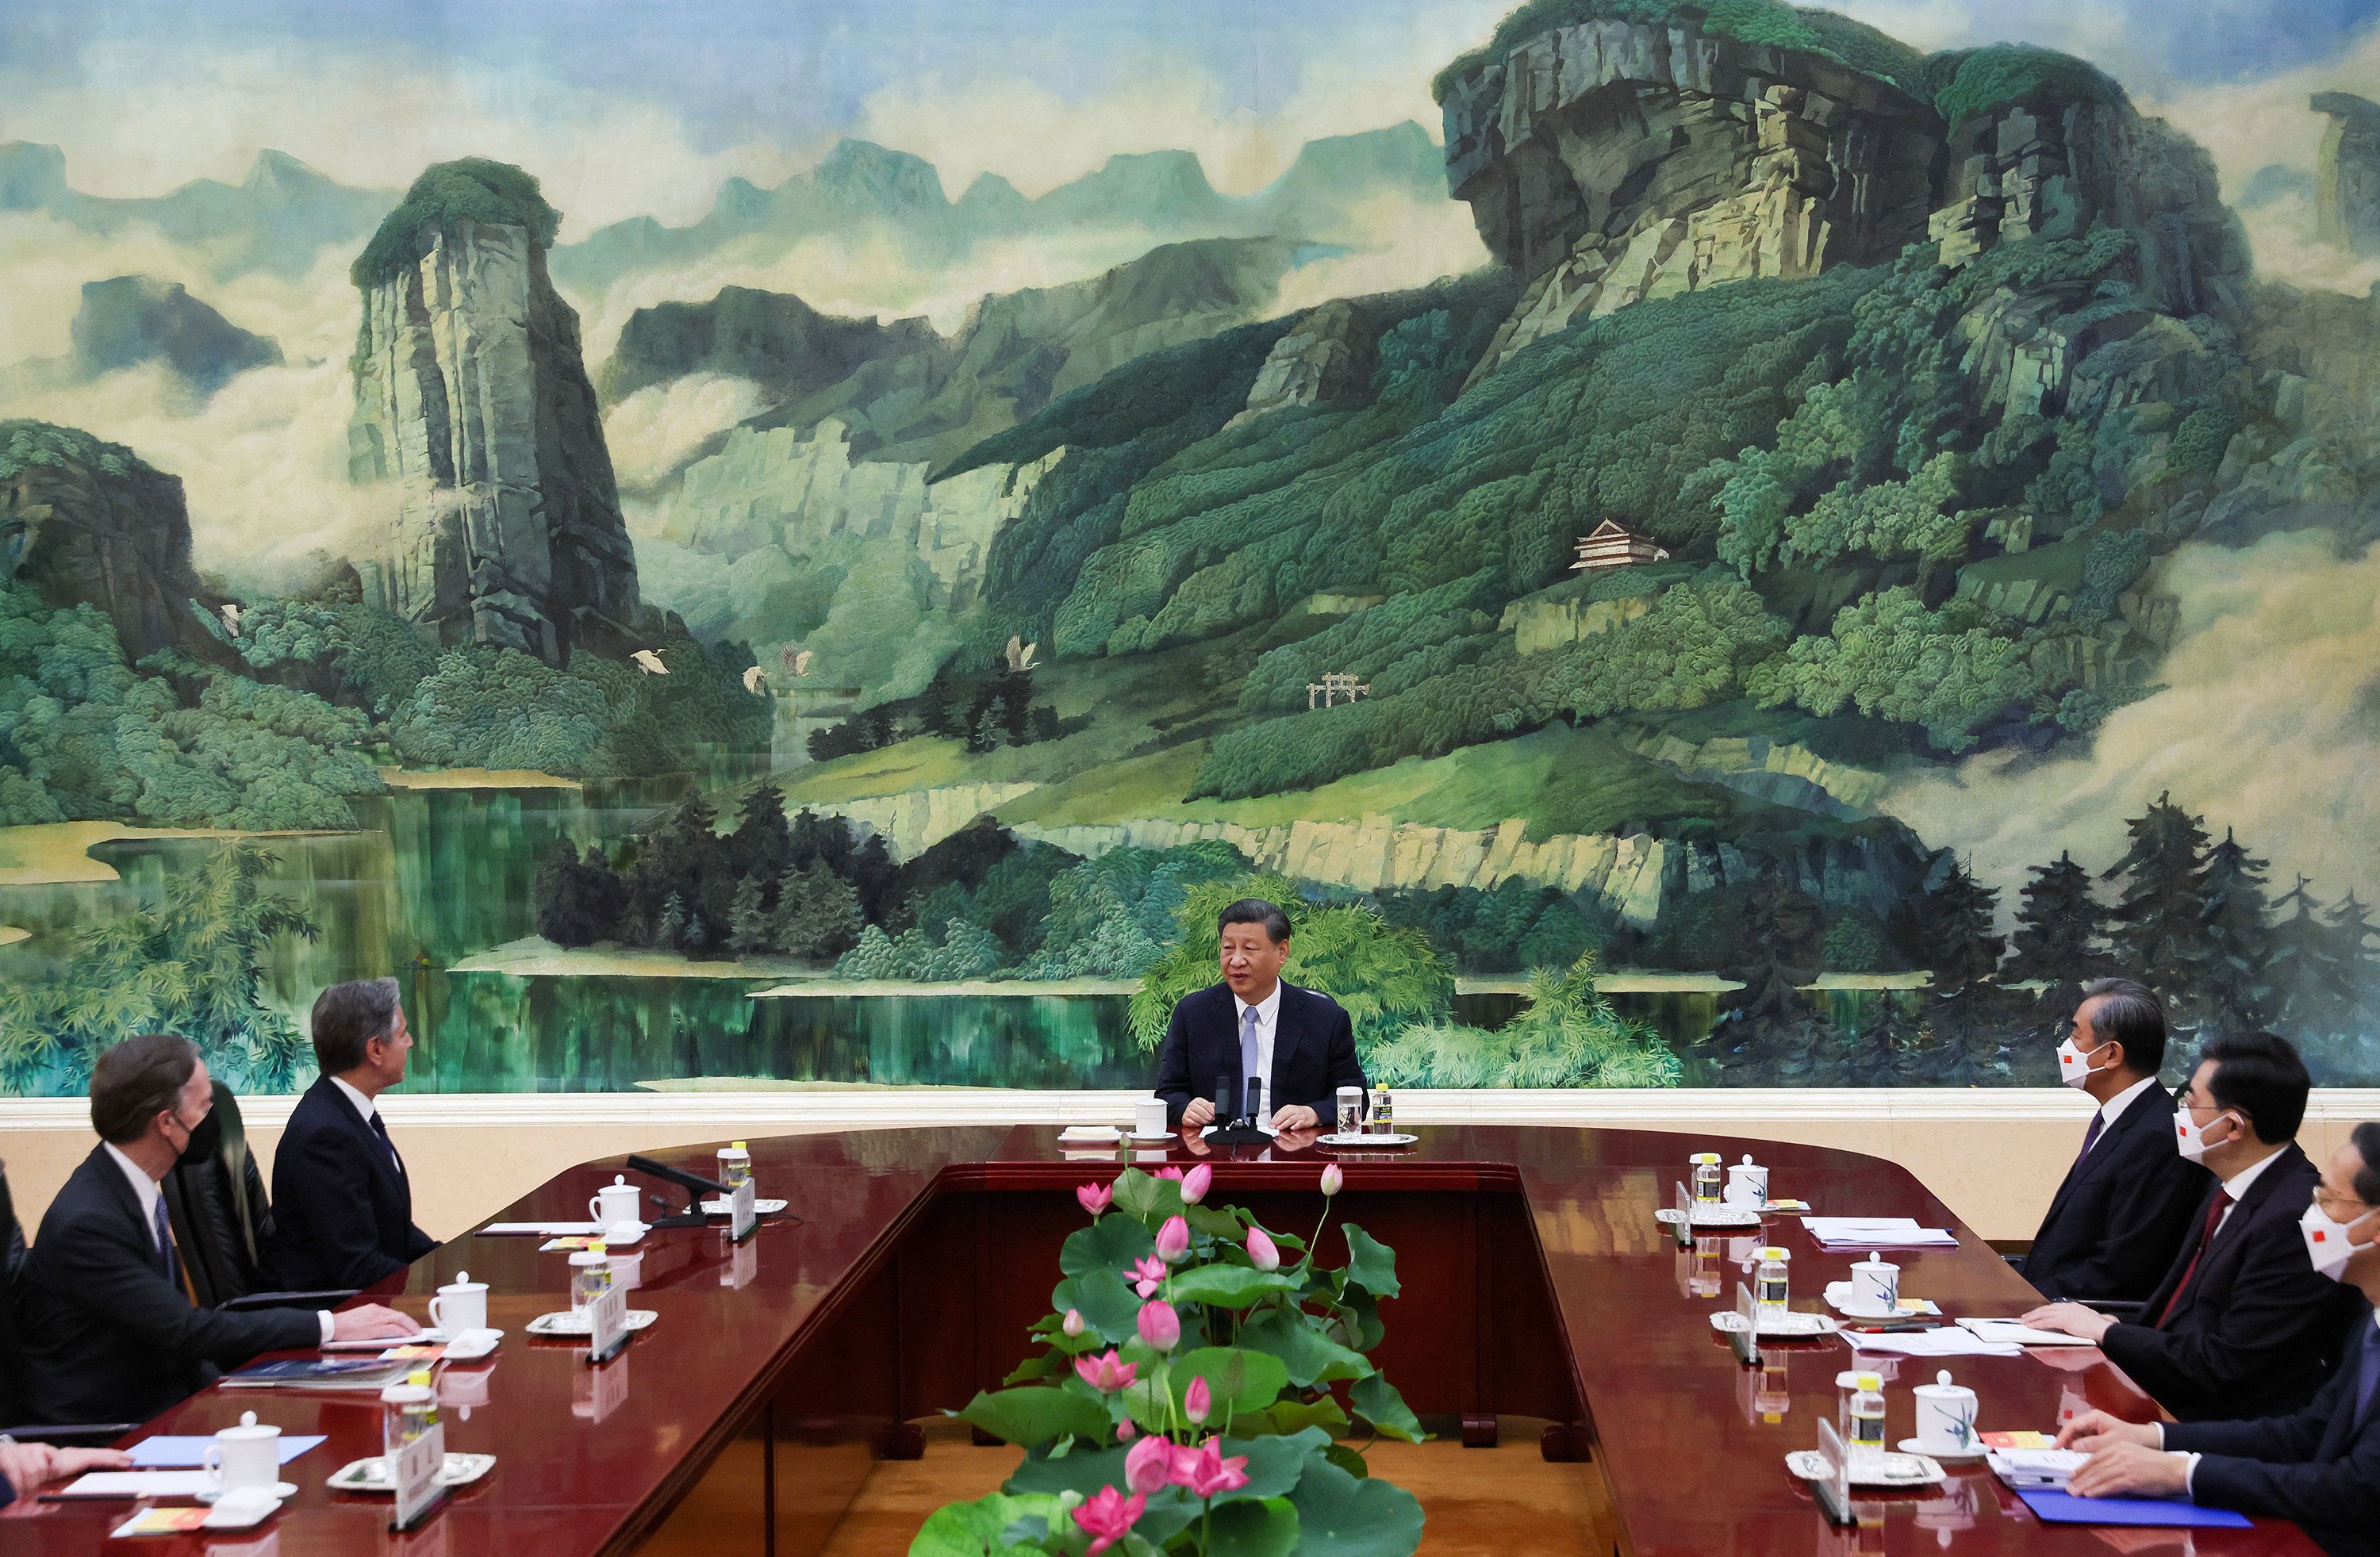 The mural behind Chinese President Xi Jinping, during hs meeting with US Secretary of State Antony Blinken in the Great Hall of the People in Beijing on June 19, portrays emerald hills and clear waters in Fujian, a province famous as a hub for international trade and exchange. Photo: TNS